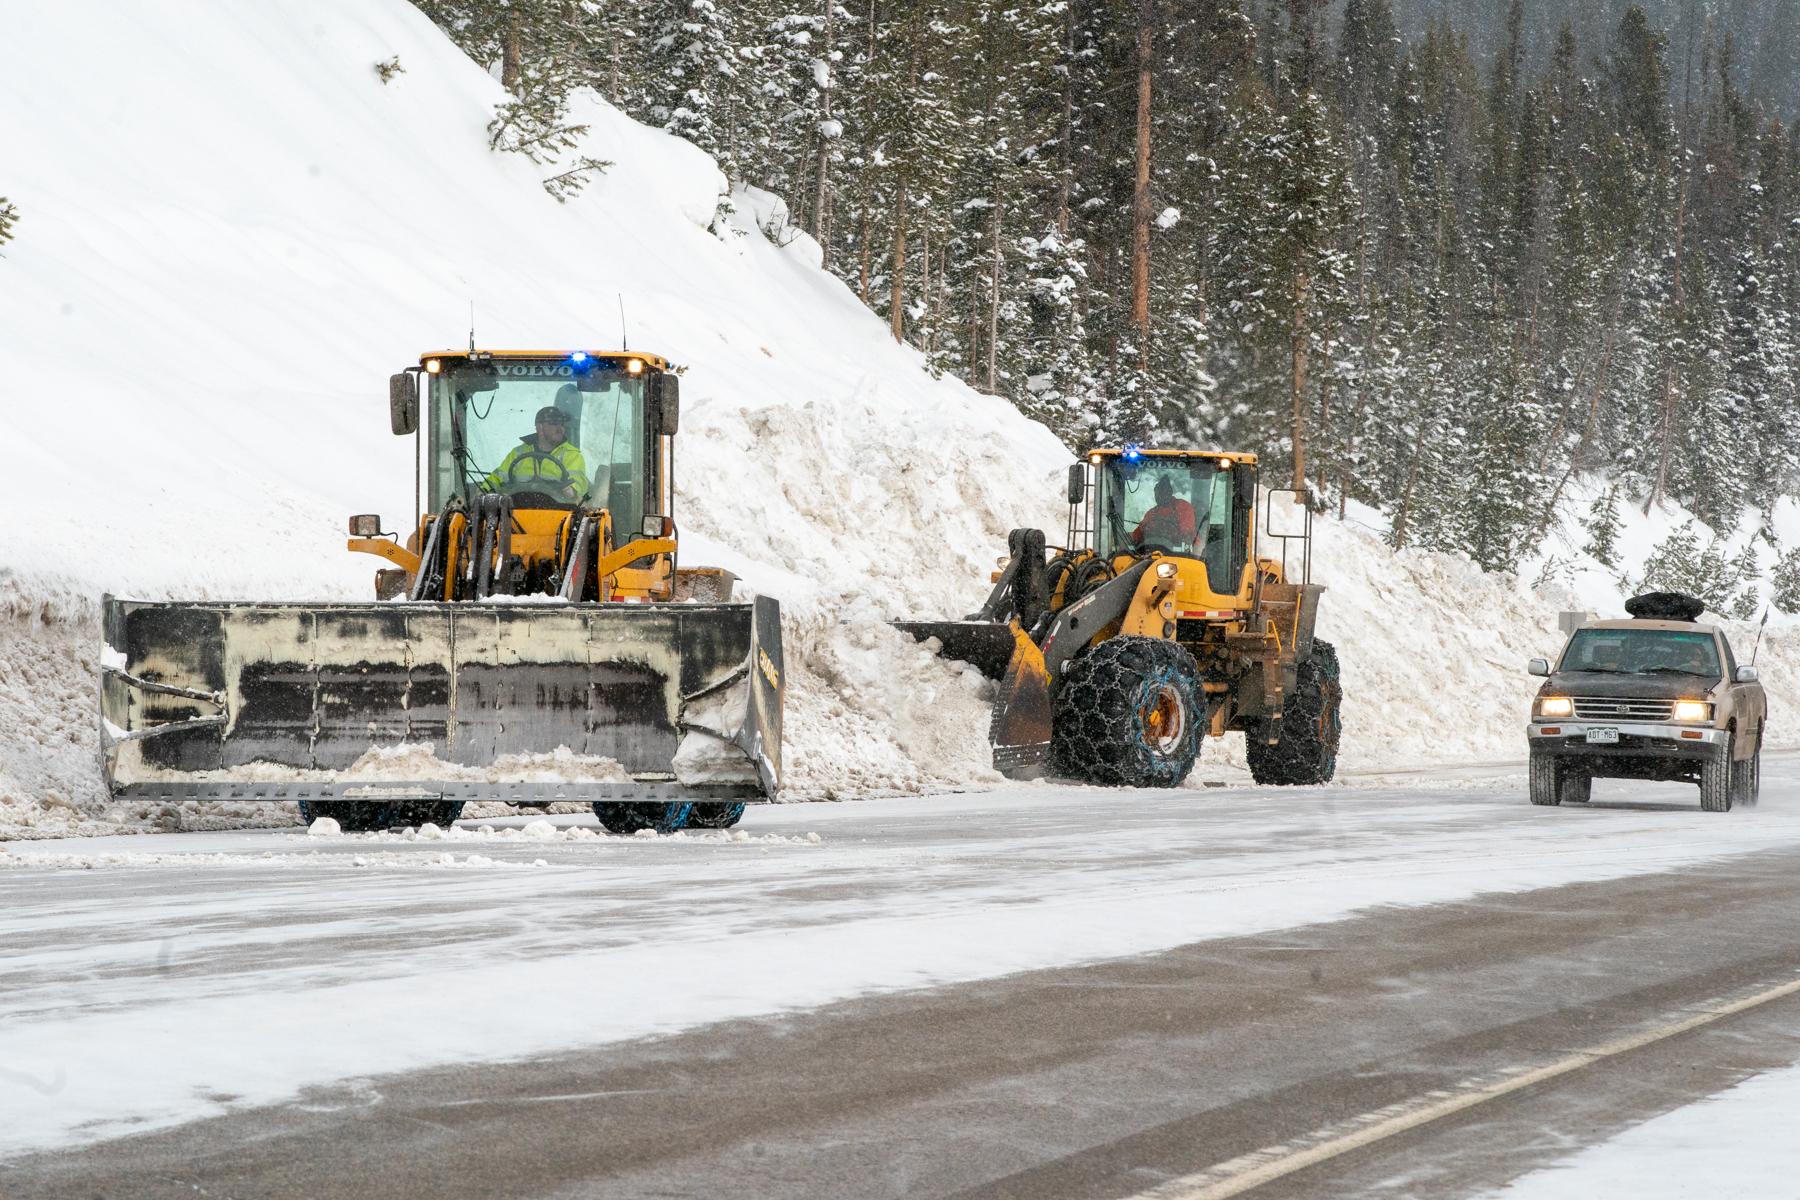 20230312-SNOW-PLOWS-RABBIT-EARS-PASS-STEAMBOAT-WINTER-WEATHER